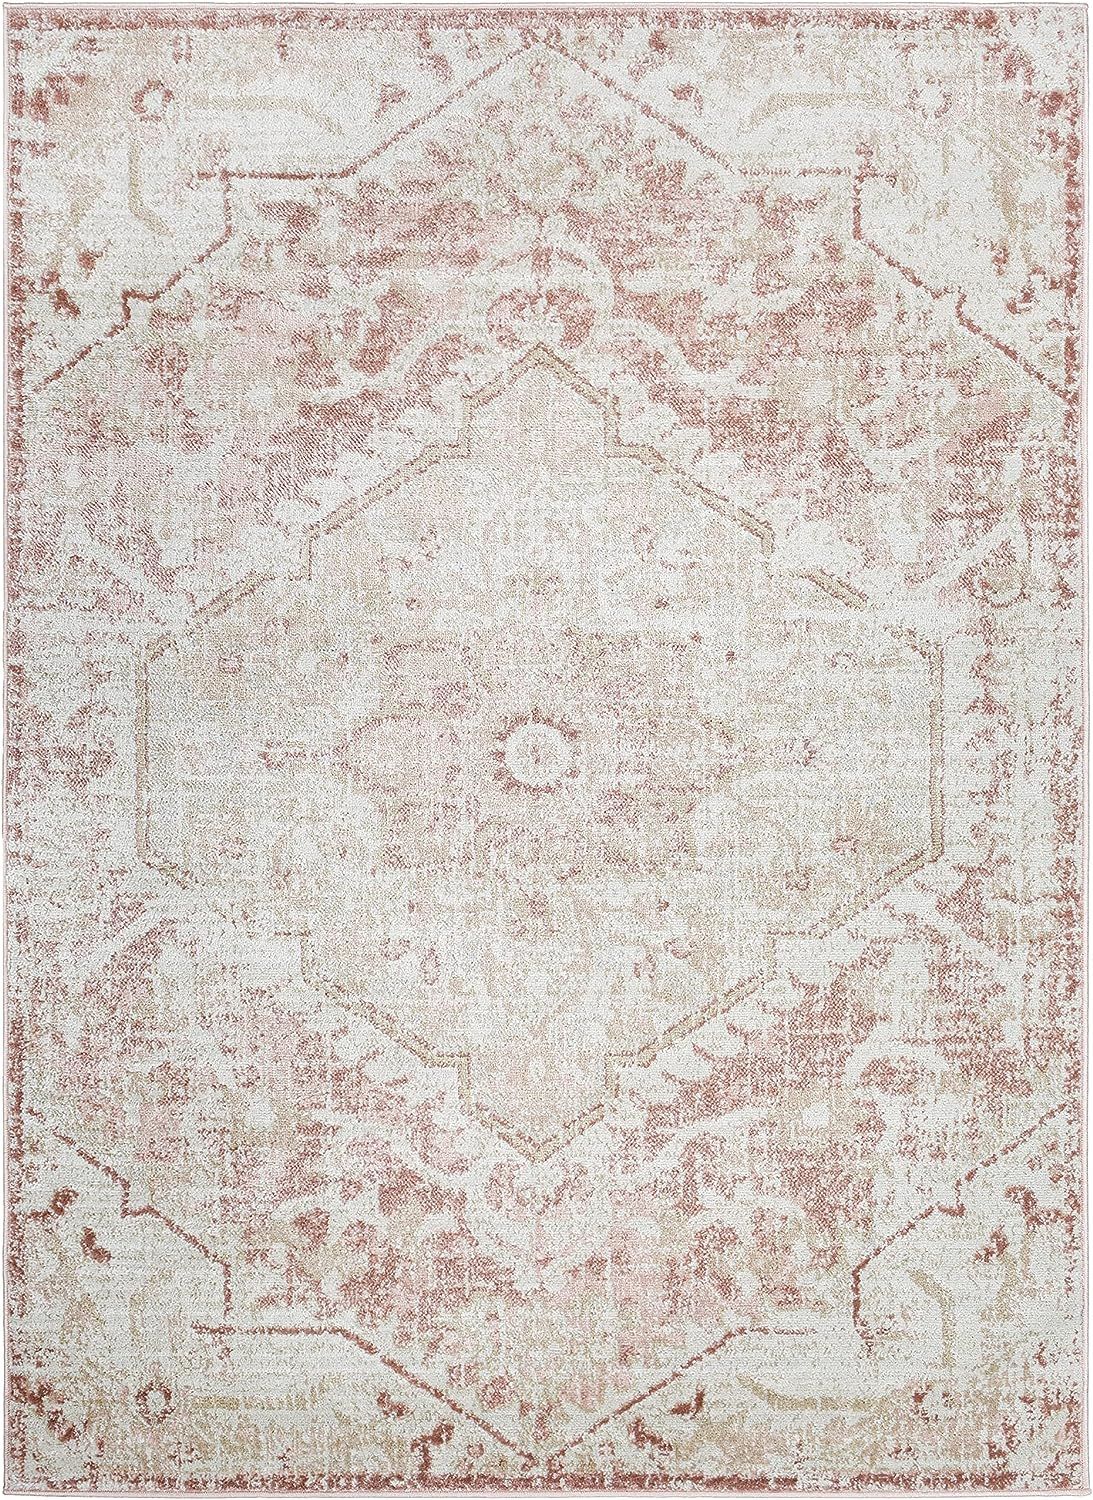 Mark&Day Area Rugs, 5x7 Baflo Traditional Blush Area Rug, Pink / White / Beige Carpet for Living ... | Amazon (US)